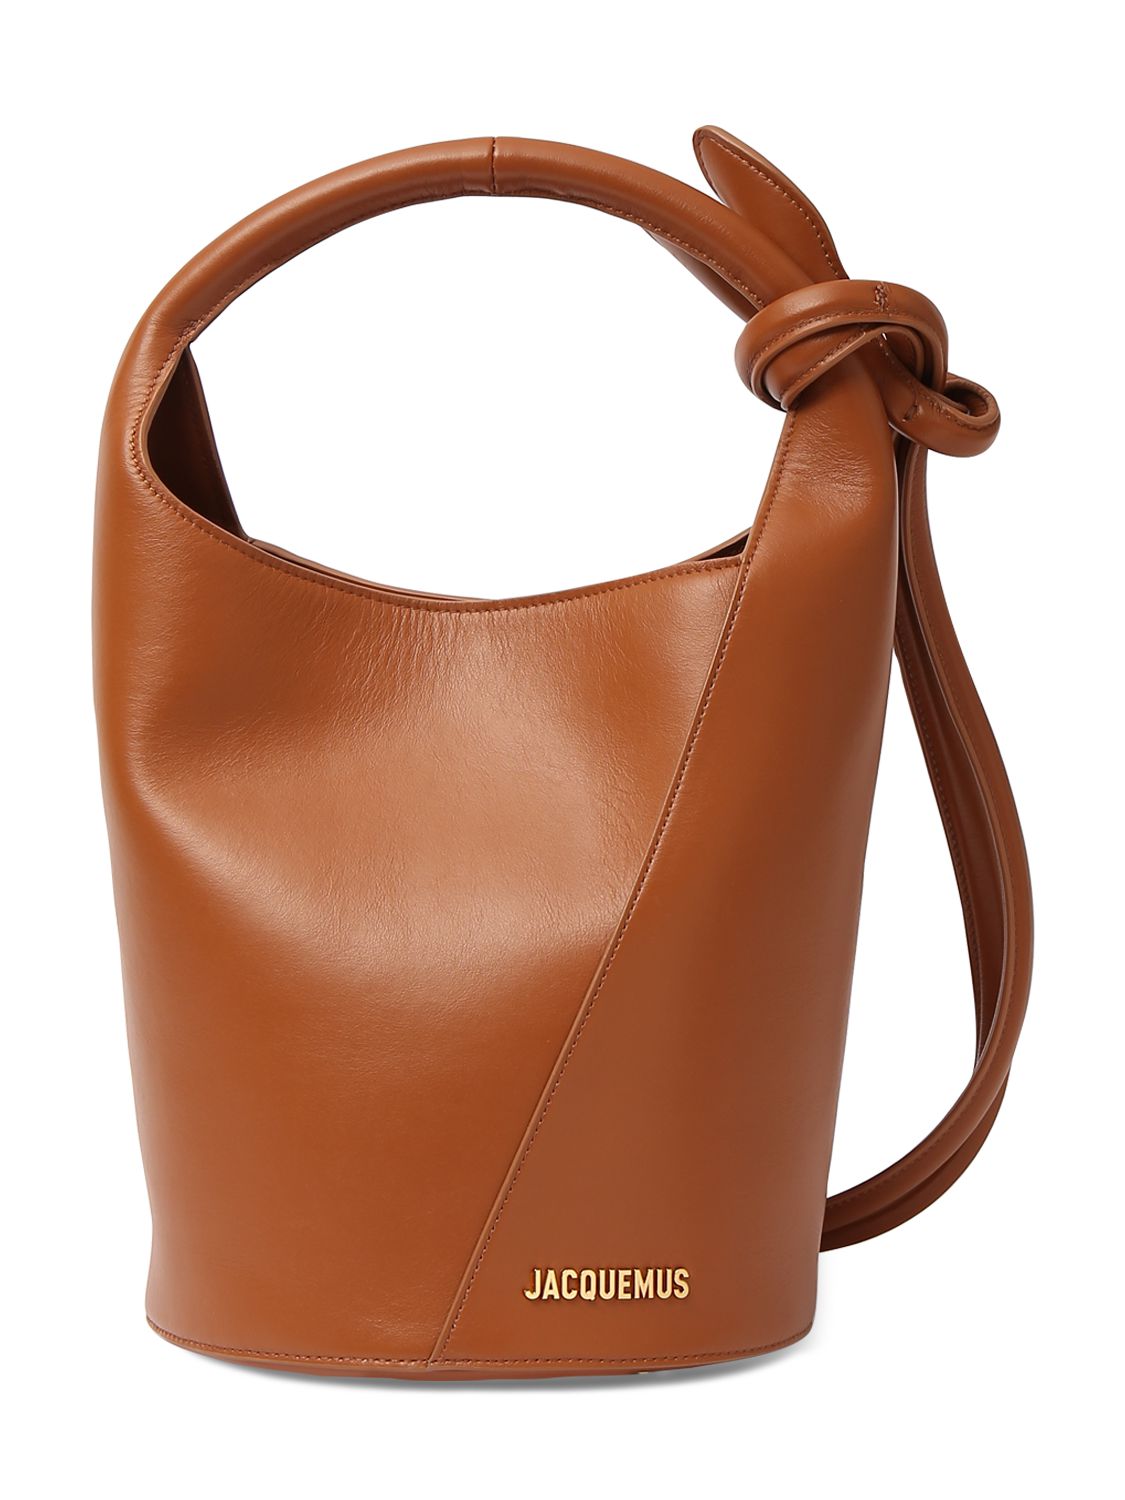 Jacquemus Le Petit Tourni Smooth Leather Bag In Light Brown 2